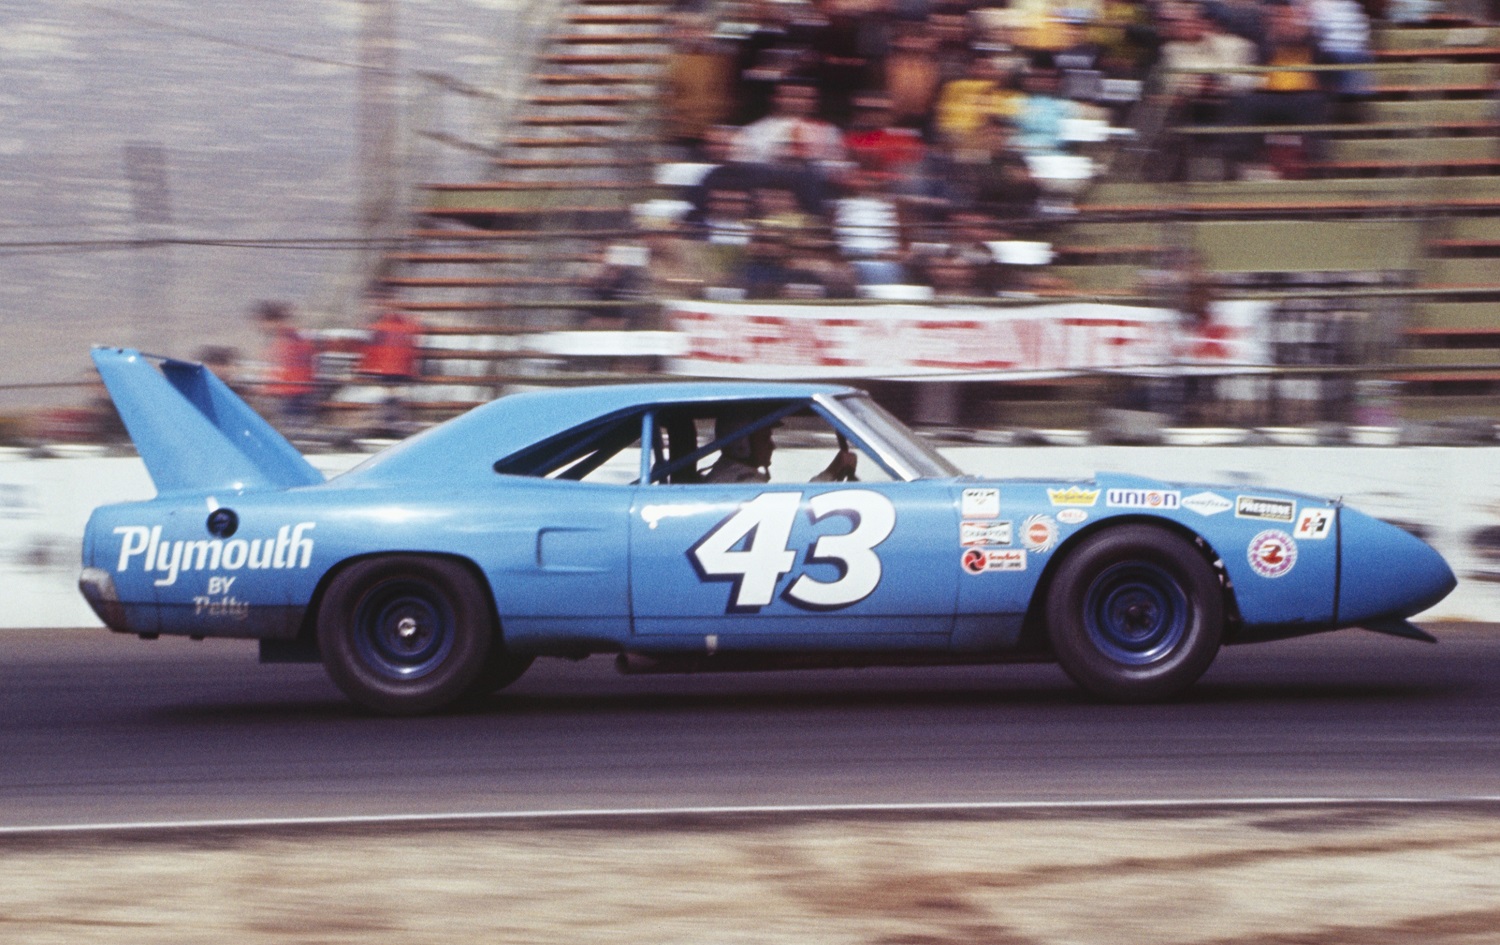 Richard Petty driving his Plymouth Superbird in 1970. |  The Enthusiast Network via Getty Images